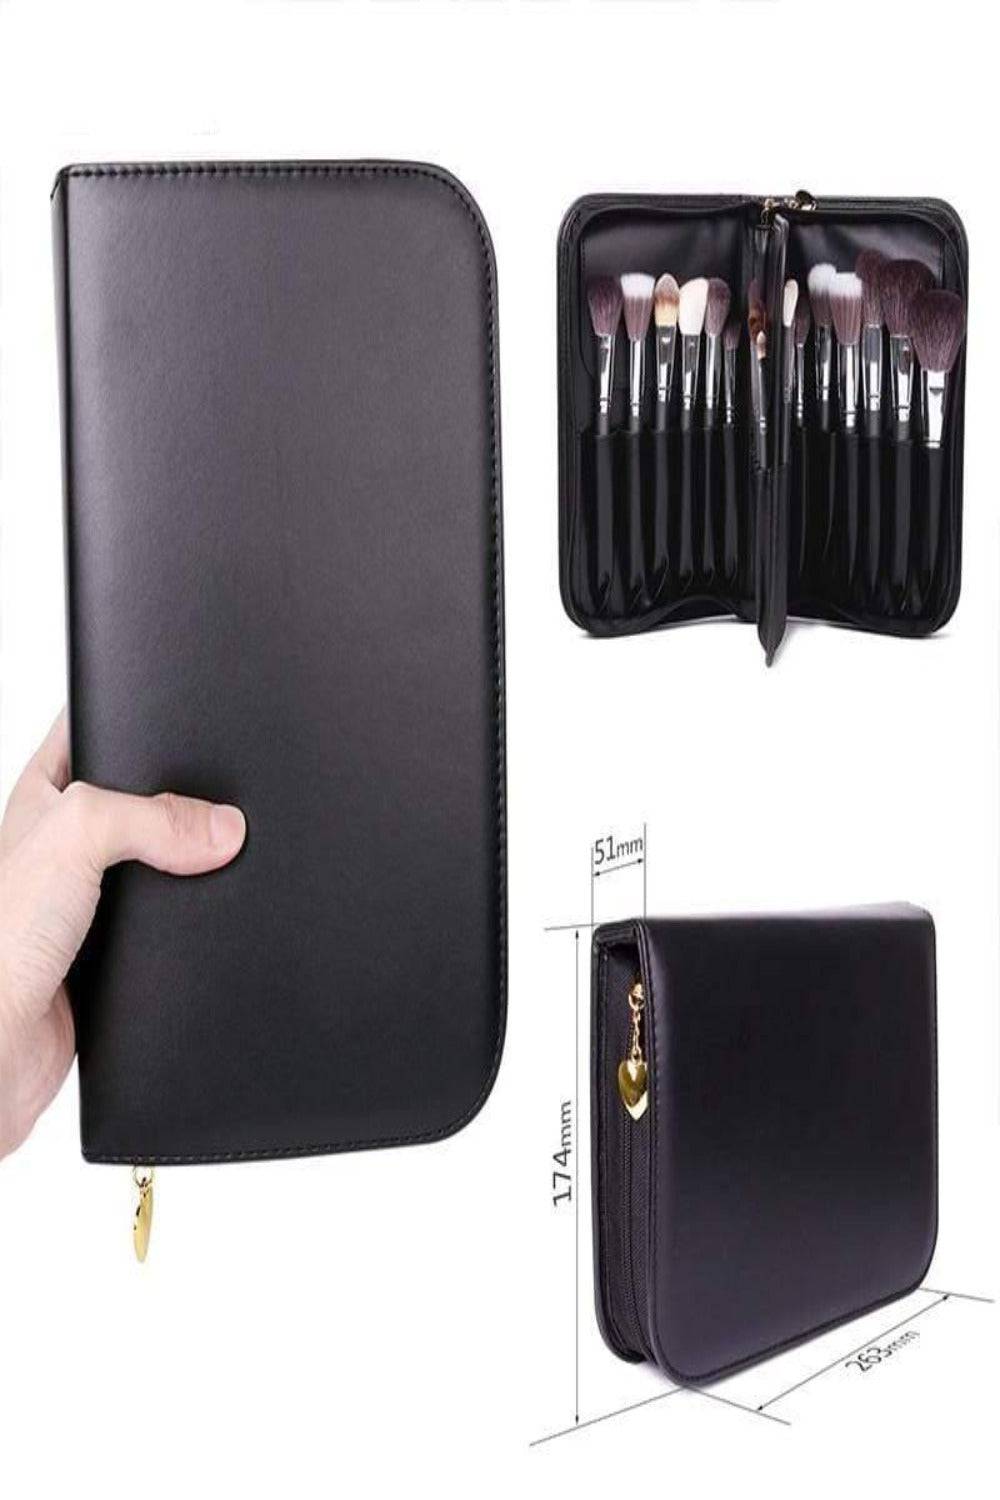 Professional Makeup Brush Set With Case - 29 Pack - TGC Boutique - Makeup Brushes